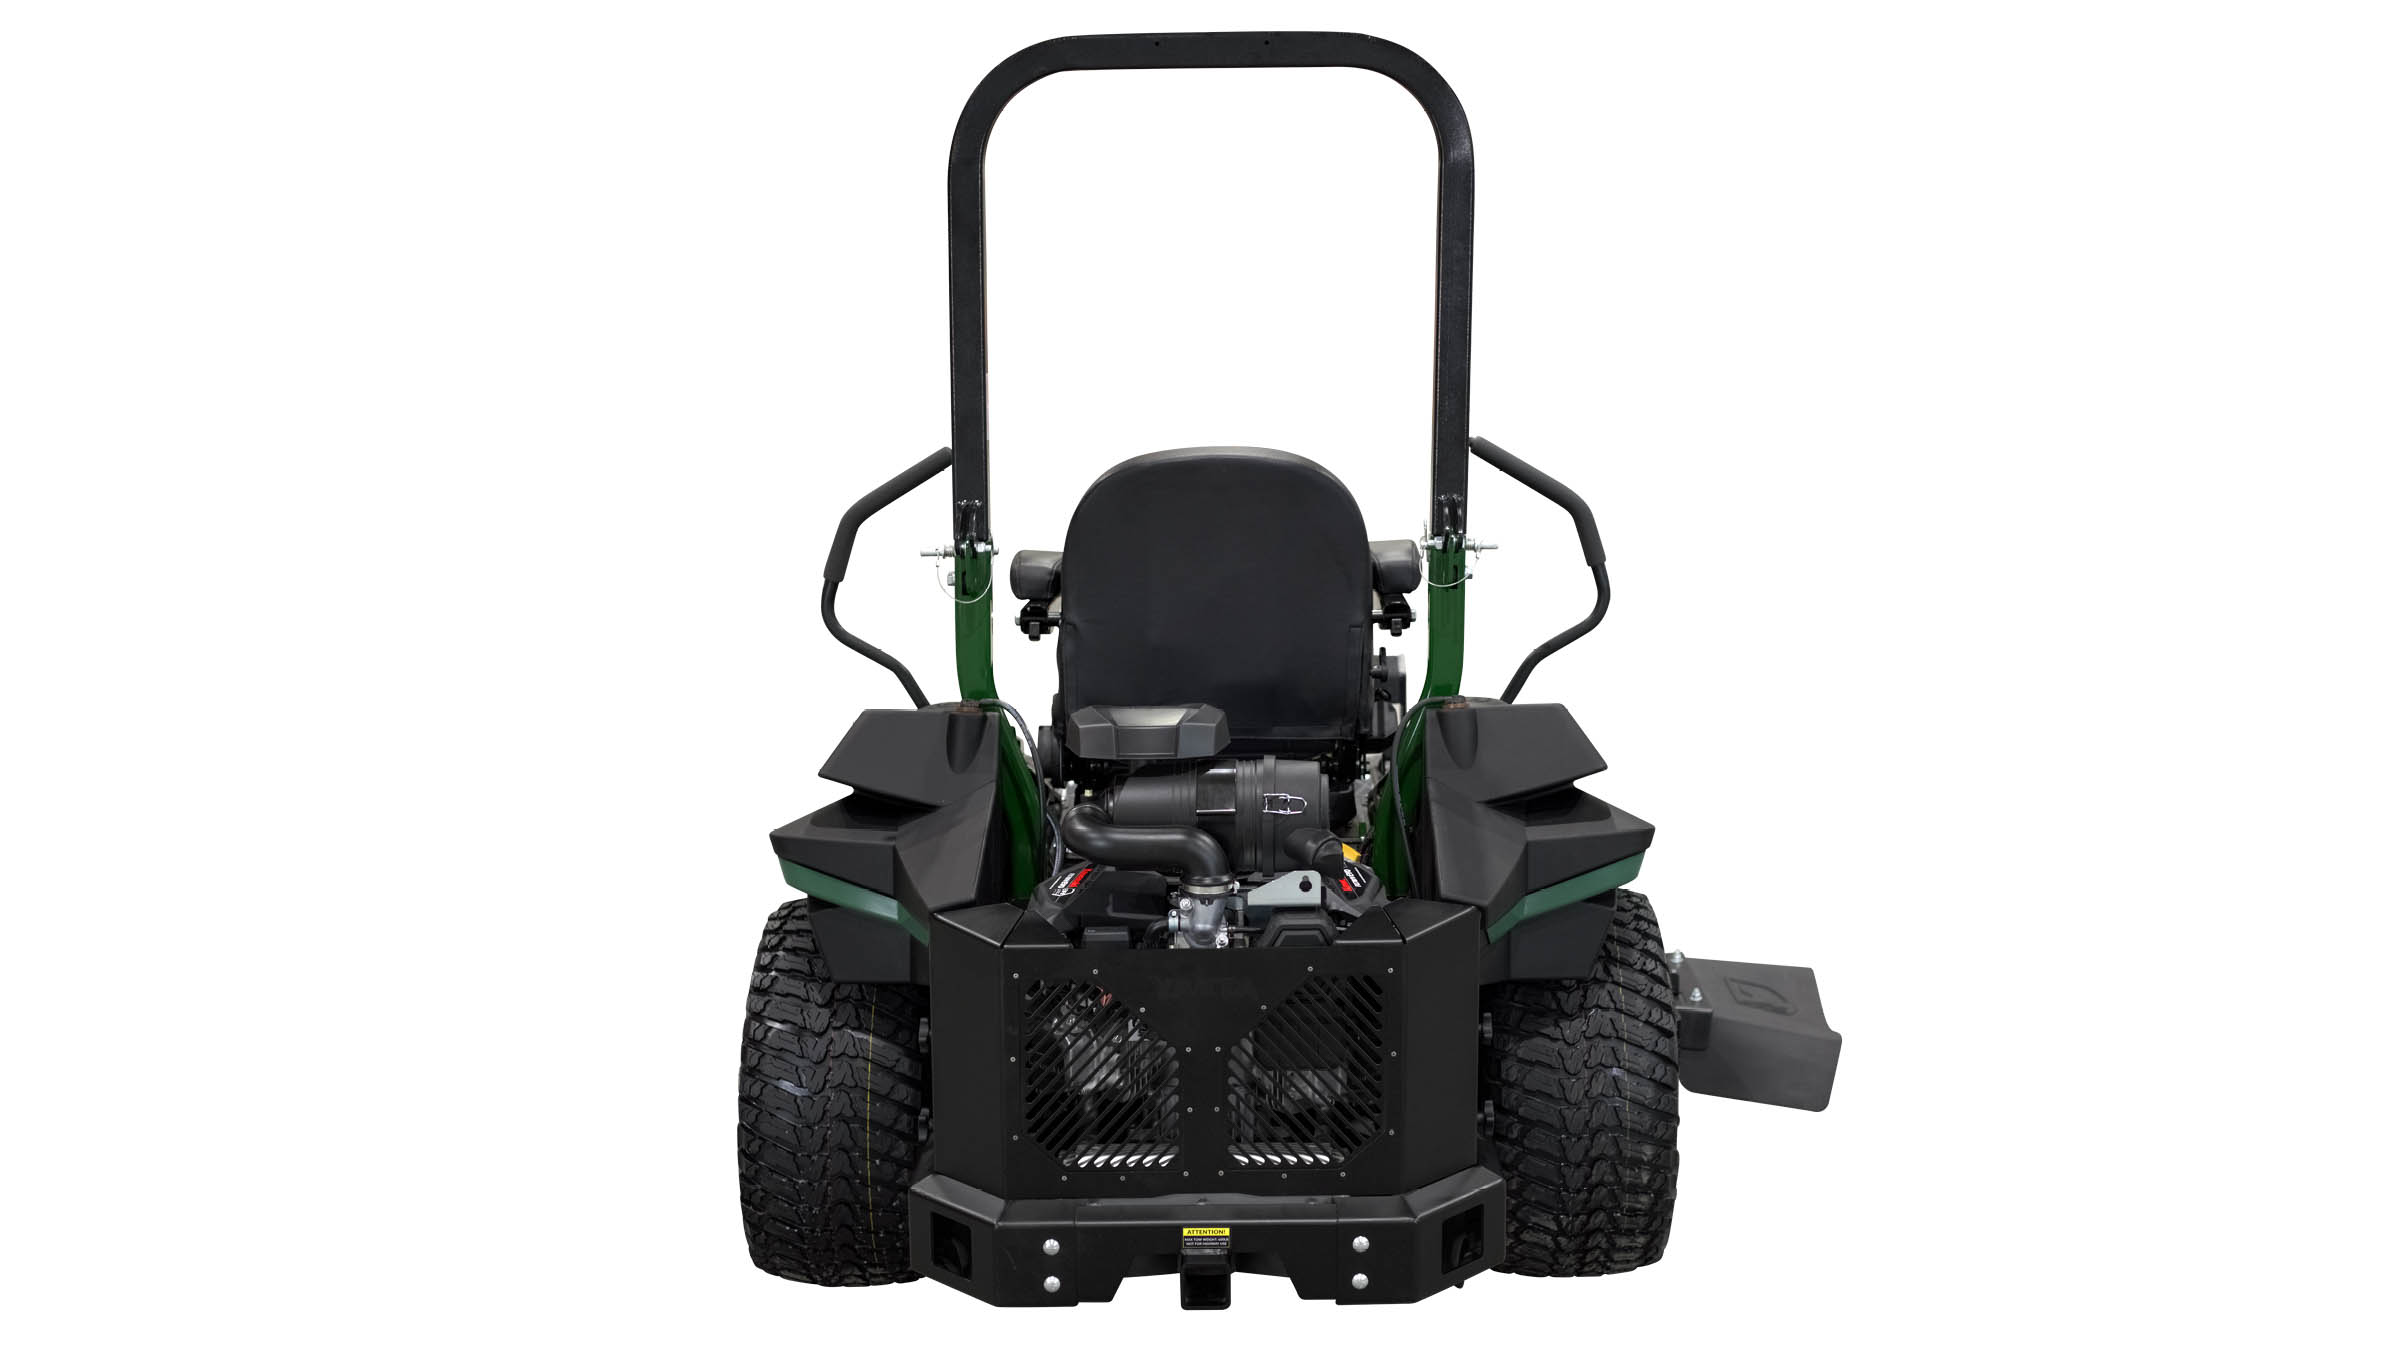 Zero-turn mower engine with guard and hitch receiver